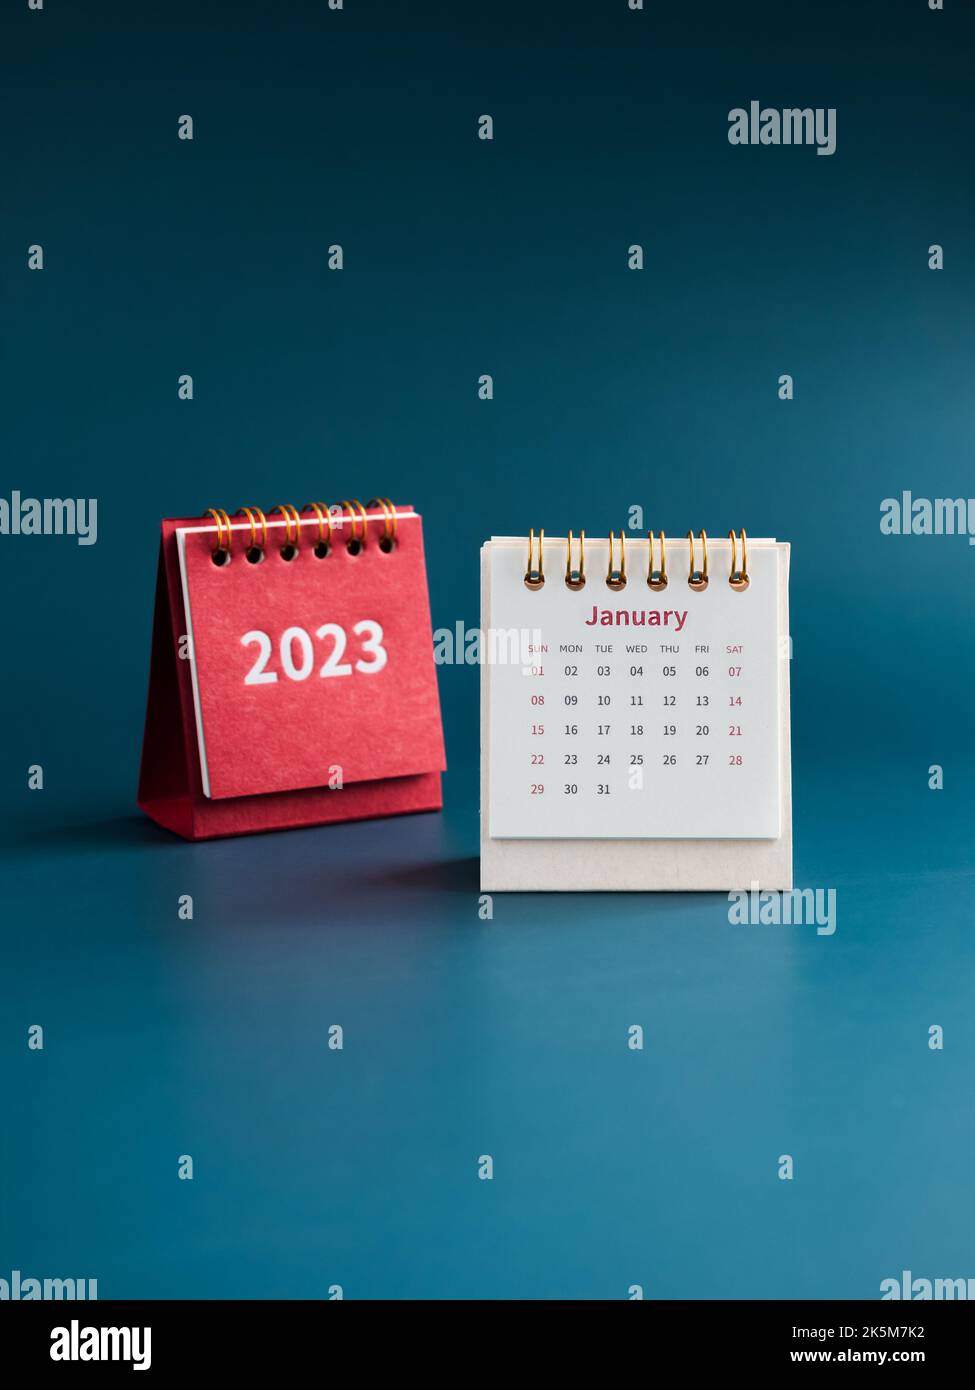 January 2023 calendar desk for the organizer to plan and reminder on